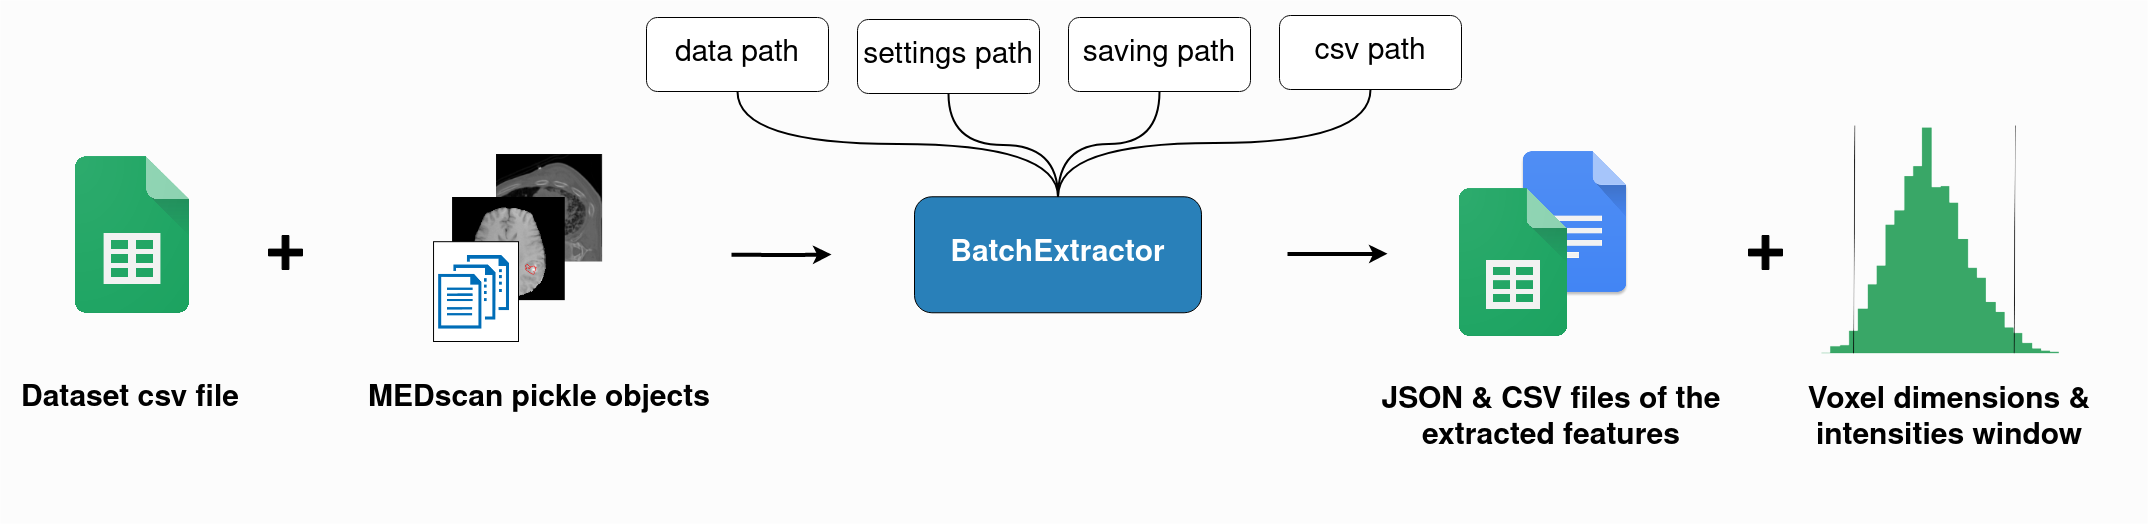 _images/BatchExtractor-overview.png